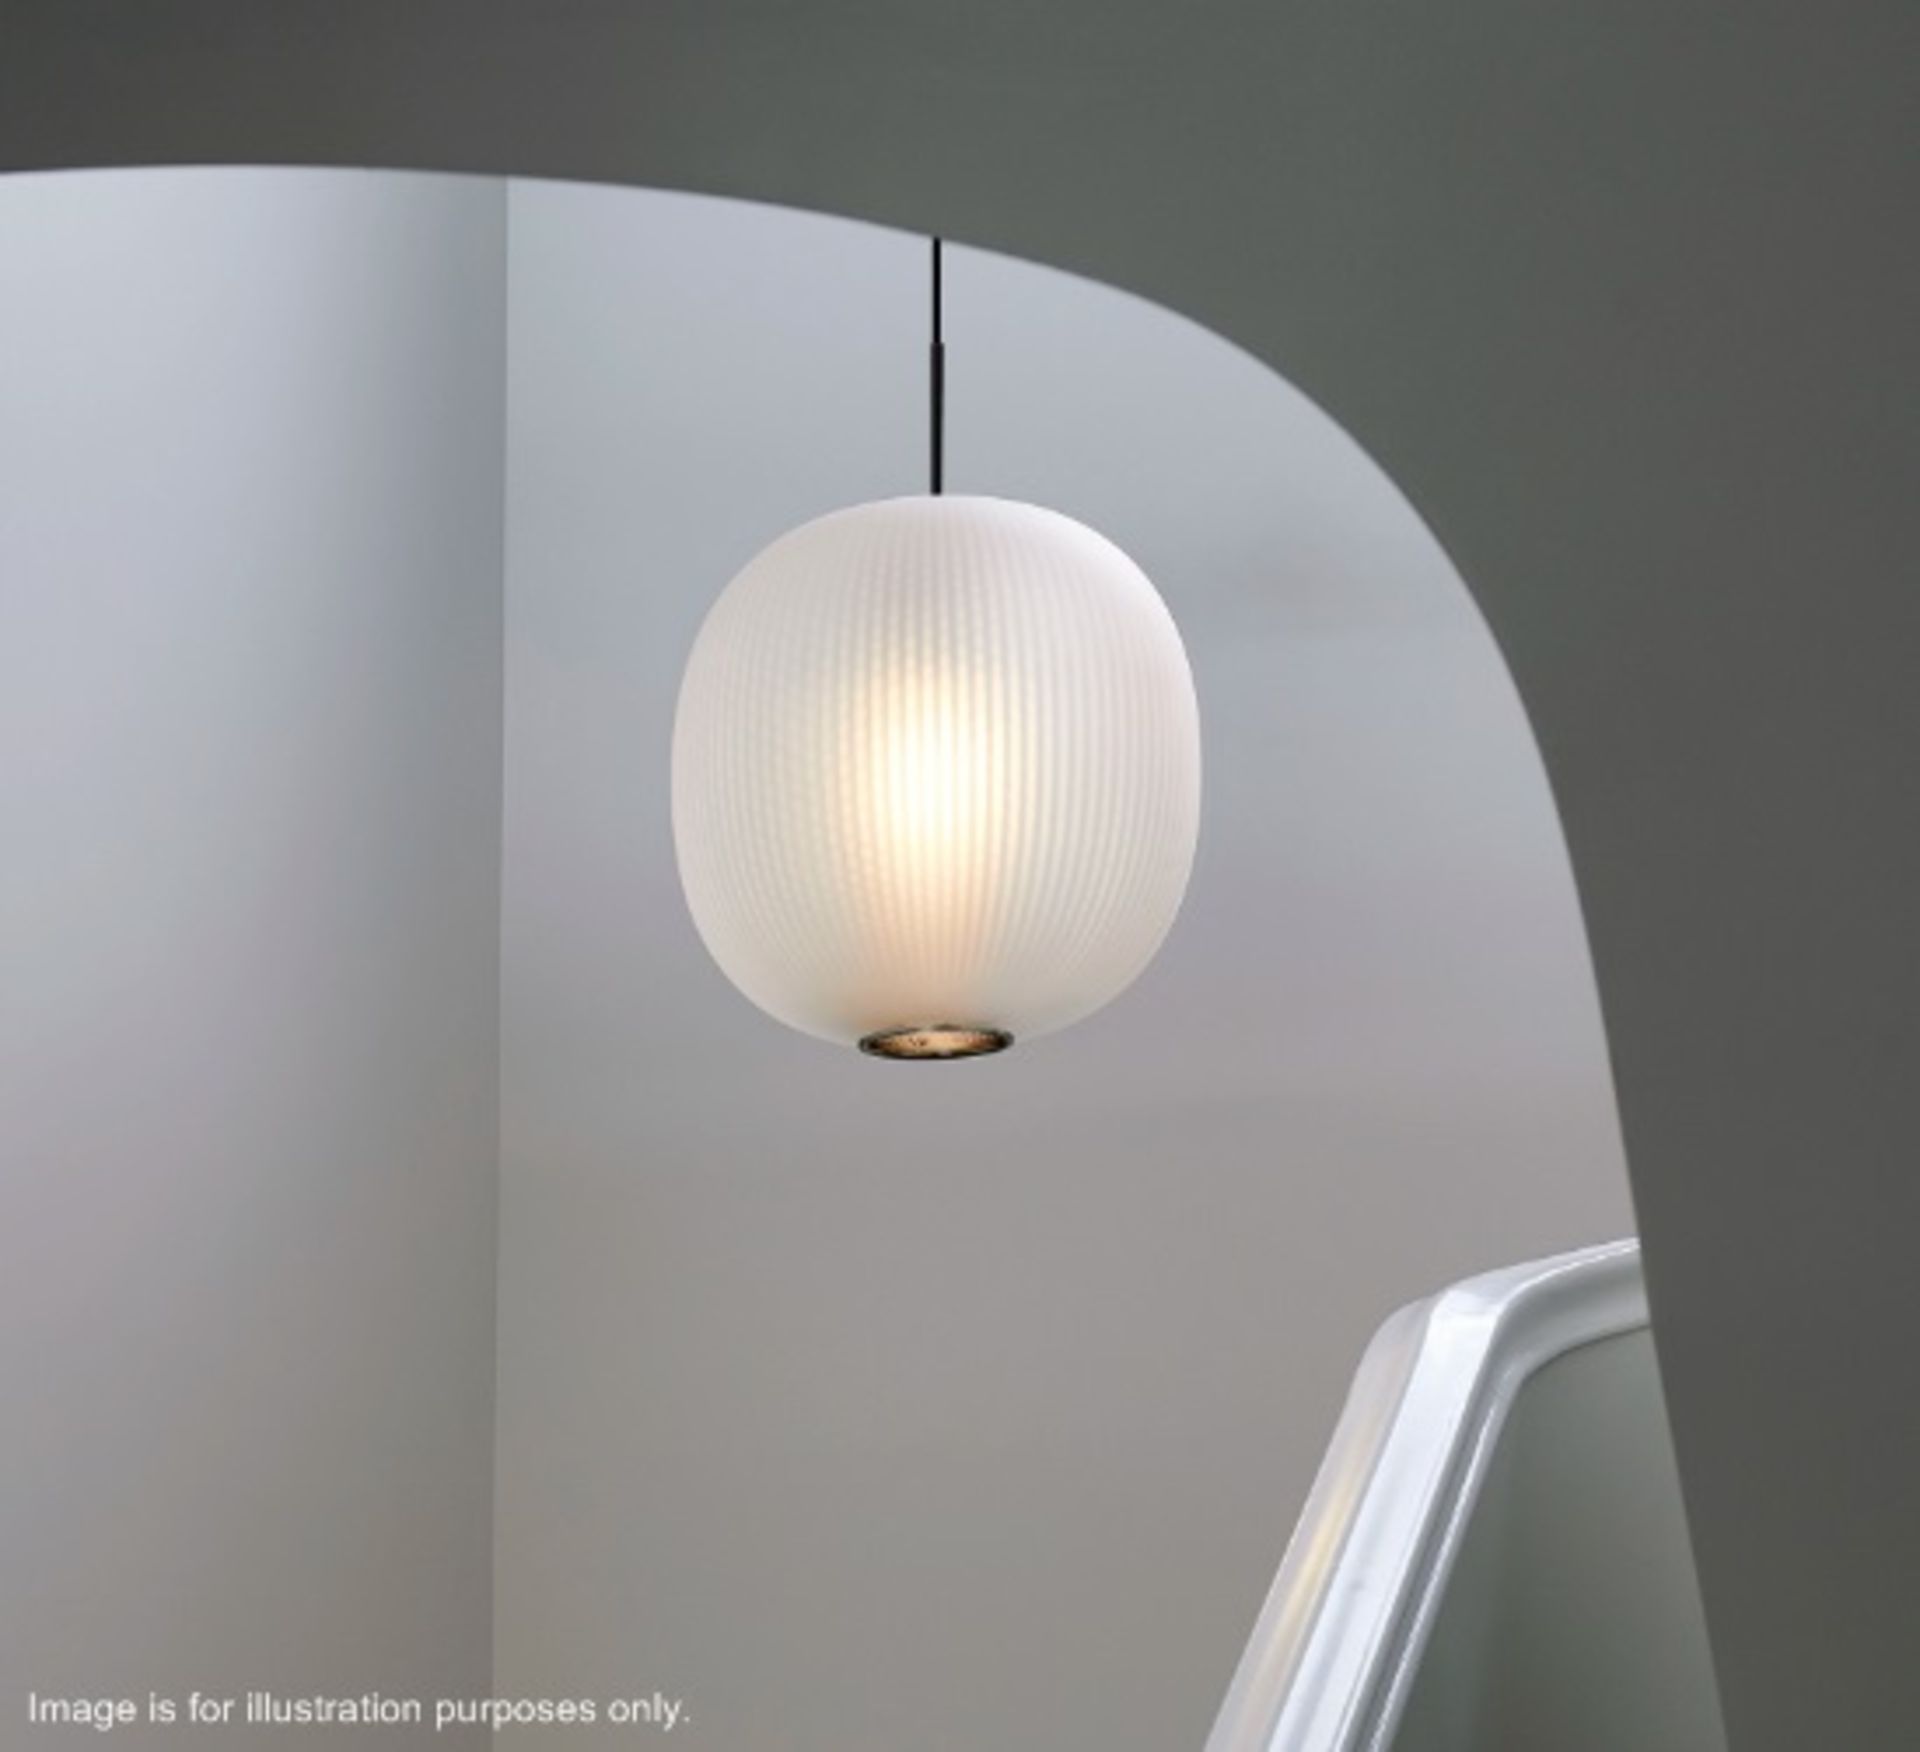 1 x 'Bloom' Pendant Light By Resident - Frosted White Glass - Original RRP £395.00 - Image 2 of 6